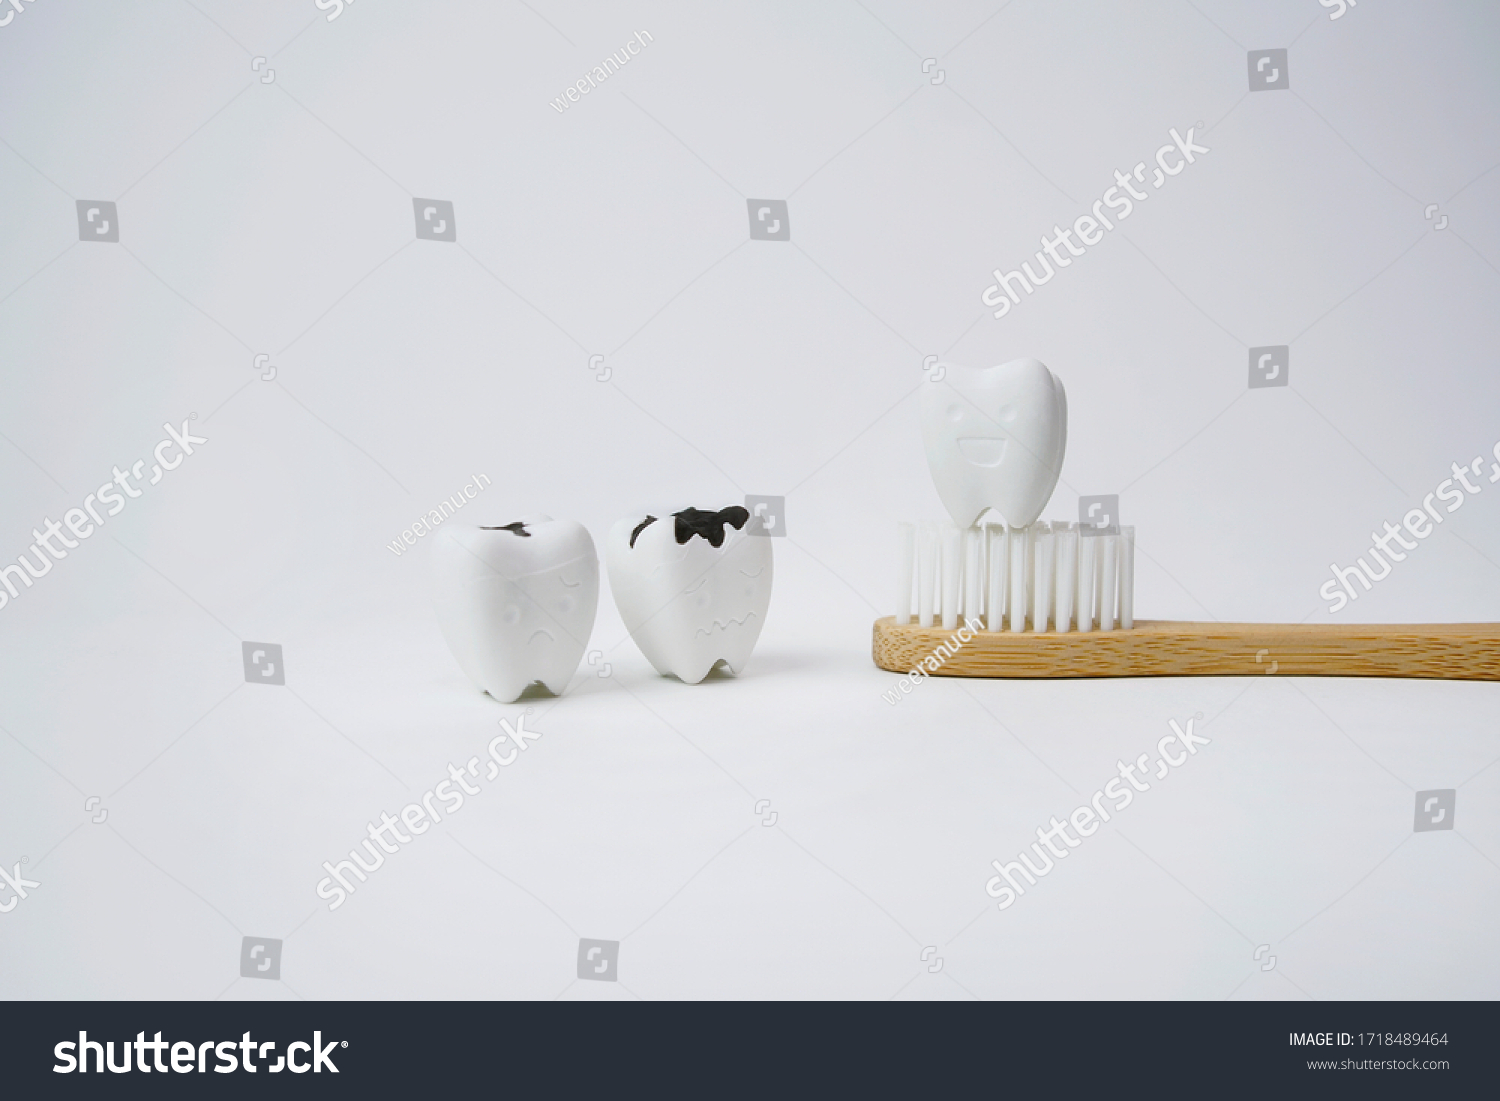 Healthy Tooth on Wooden Brown Toothbrush with Cavity and Decayed Tooth on White Background, If Brush Teeth, Teeth will Good Healthy #1718489464